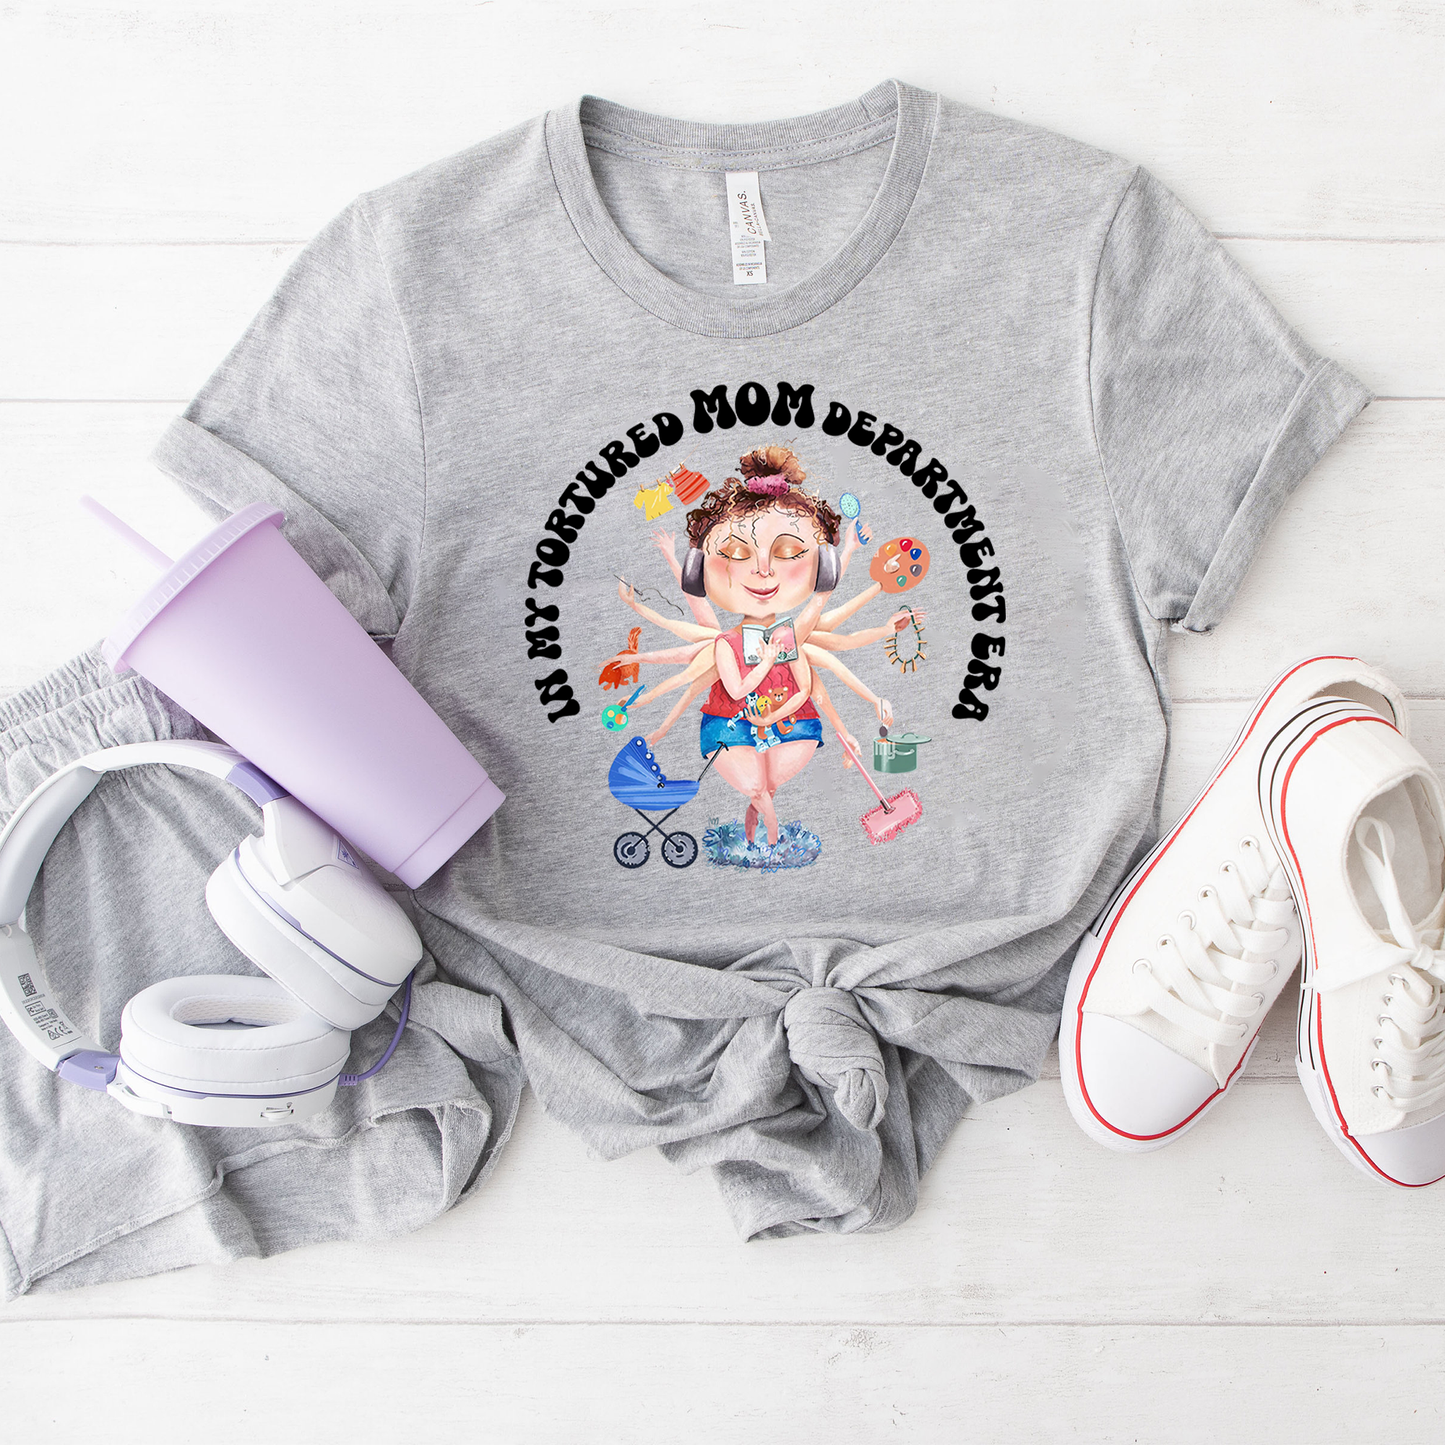 In My Tortured Mom Department Era Funny T-shirt, In My Mom Era Mother's day Gift T-shirt